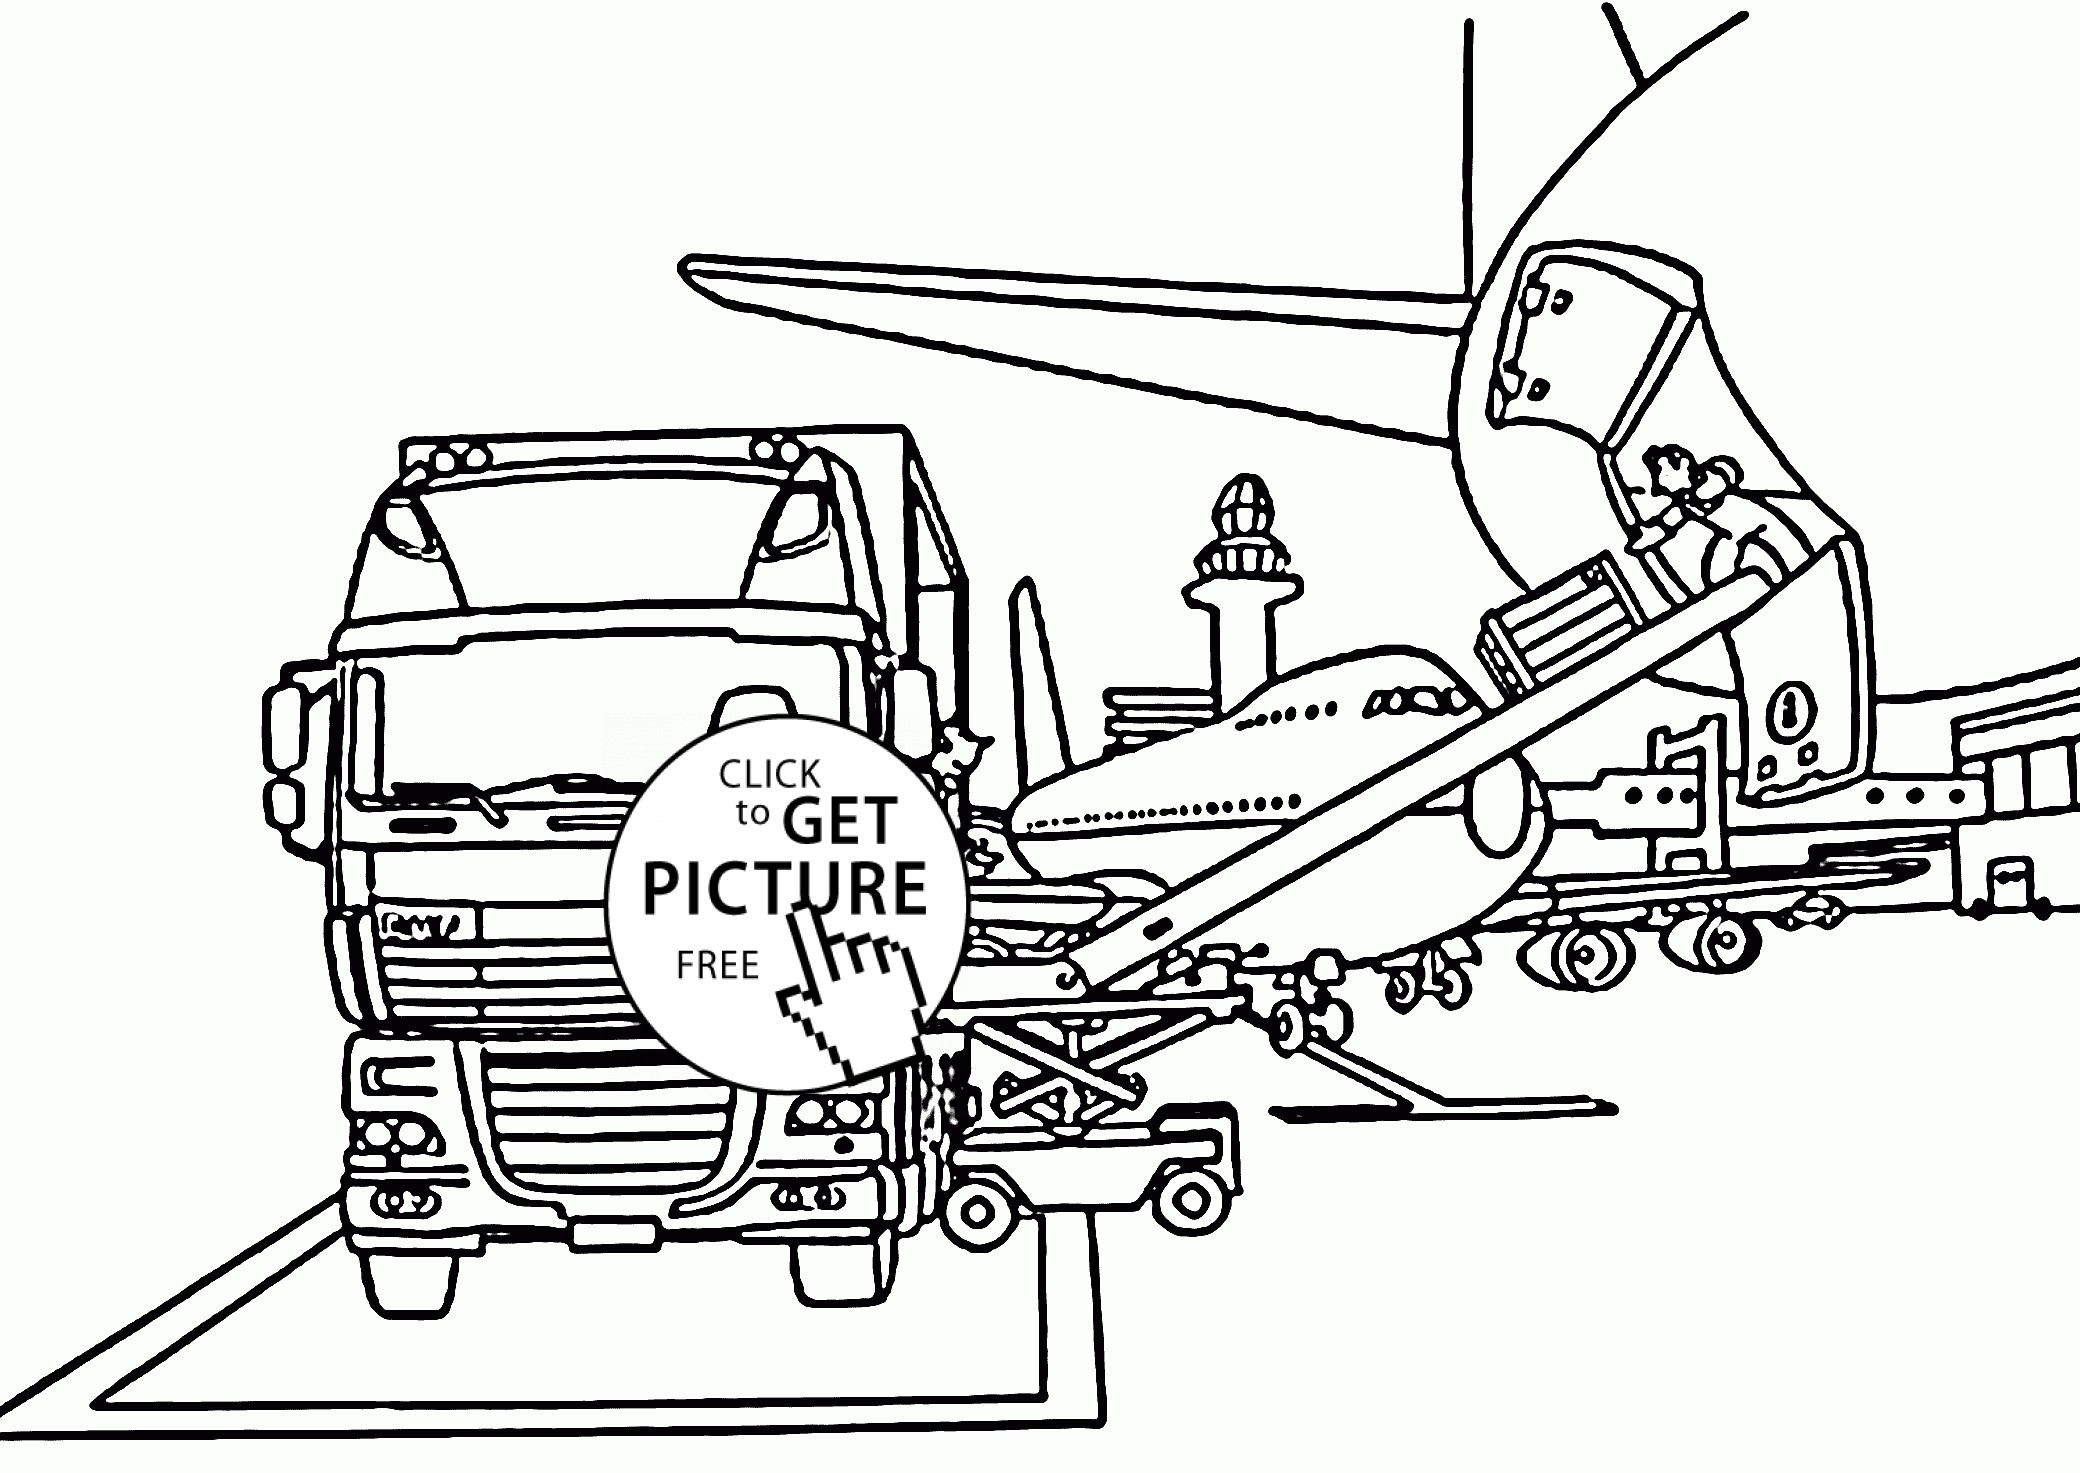 Garbage Truck Diagram Box Truck In the Airport Coloring Page for Kids Transportation Of Garbage Truck Diagram